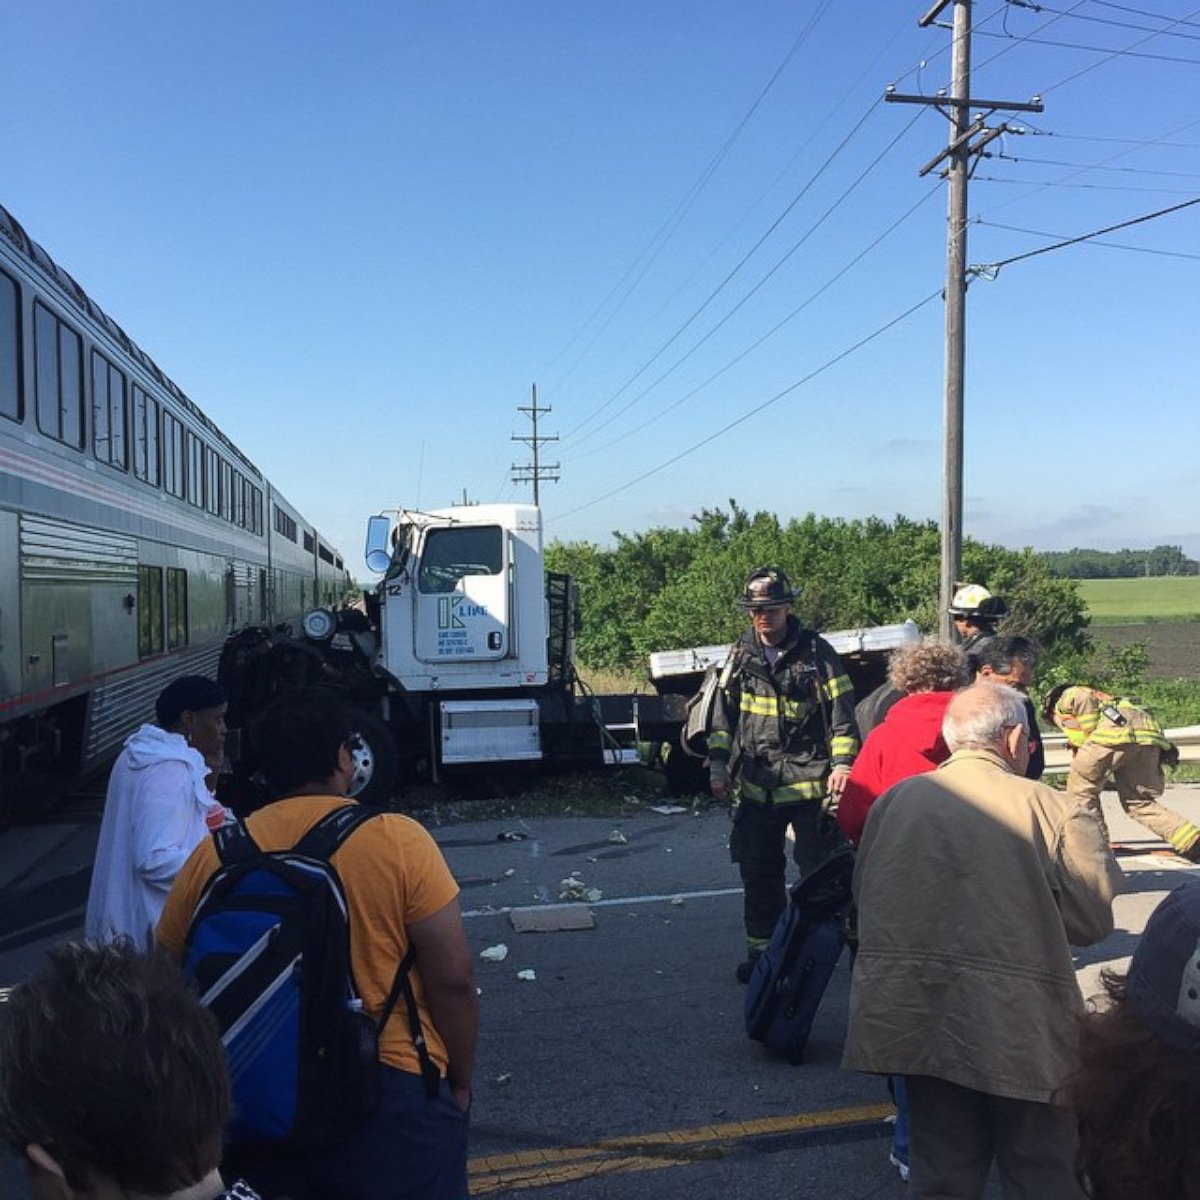 PHOTO: A bystander photo shows the scene where an Amtrak train collided with a truck outside Wilmington, Ill., June 5, 2015.